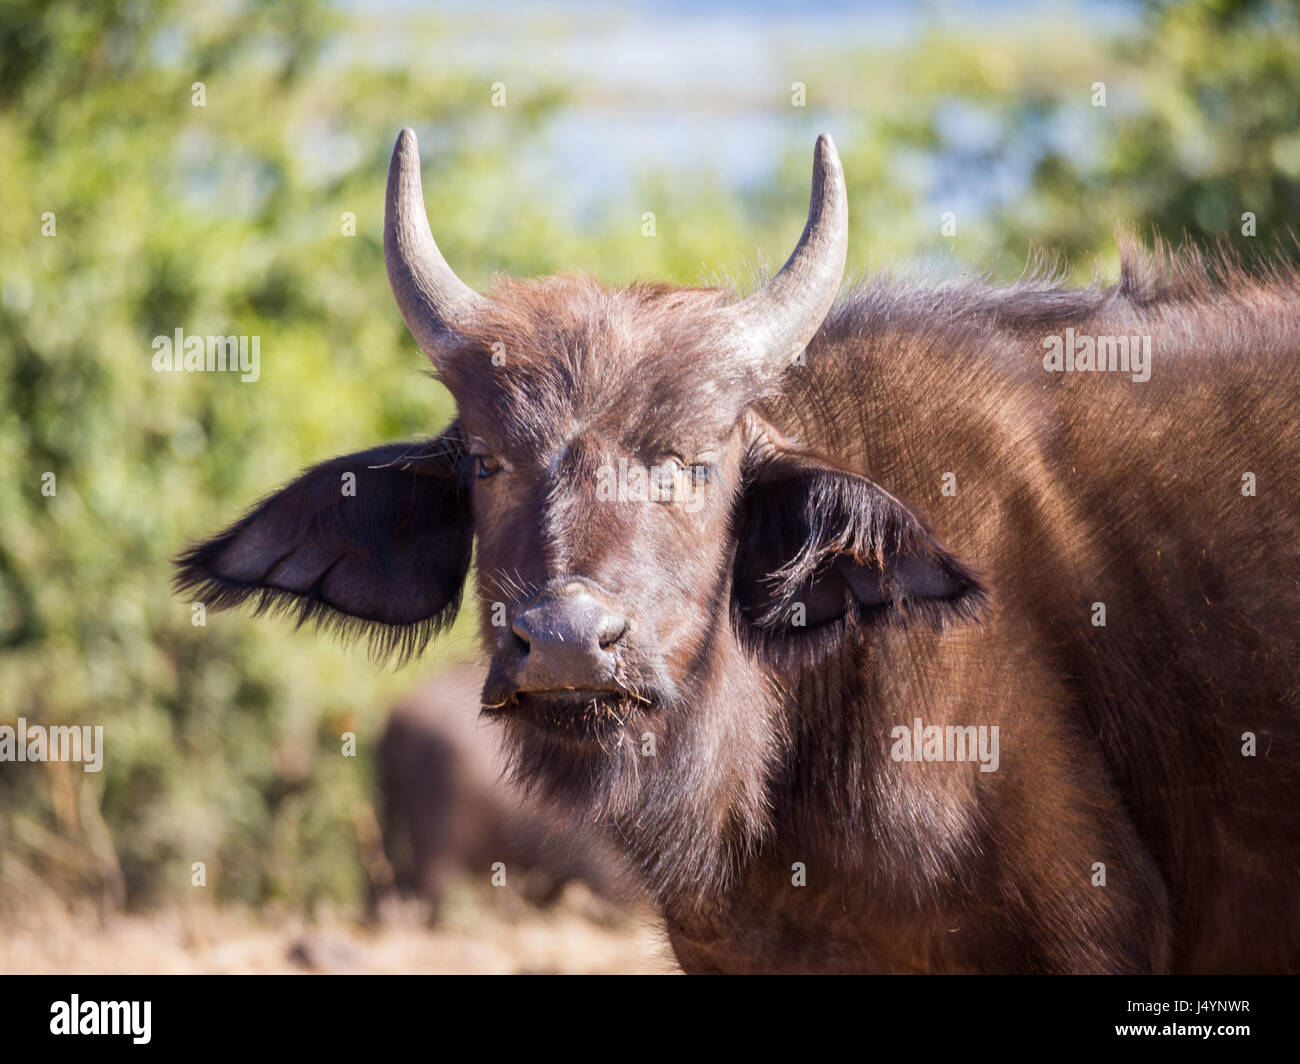 Buffalo Hair High Resolution Stock Photography and Images -